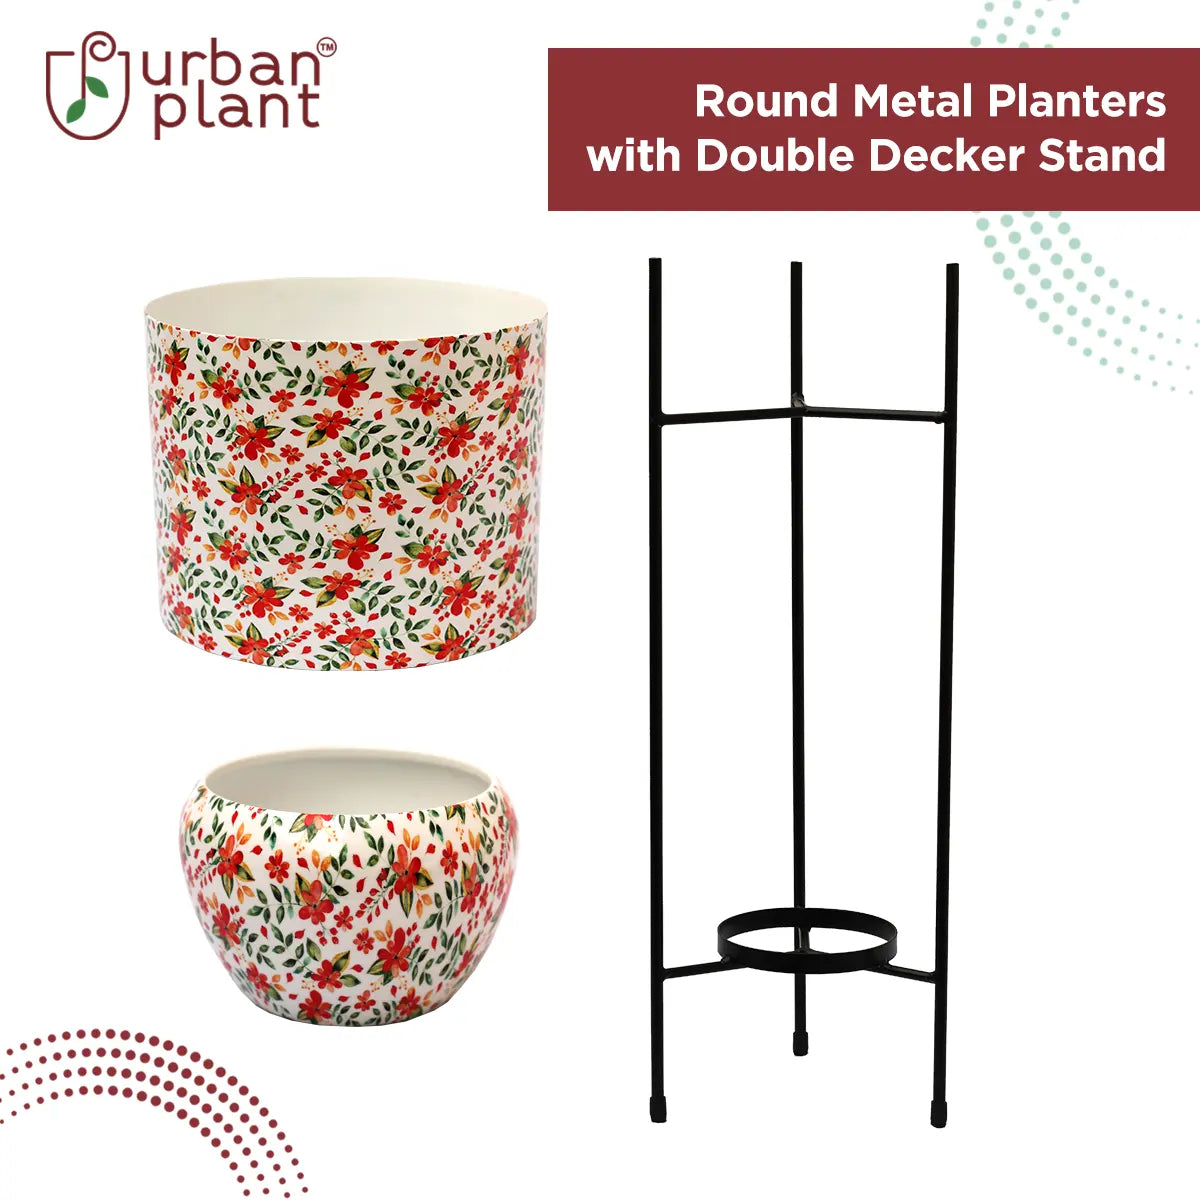 Round Metal Planters/Pots for Indoor Plants with Double Decker Stand Metal Planter Urban Plant 